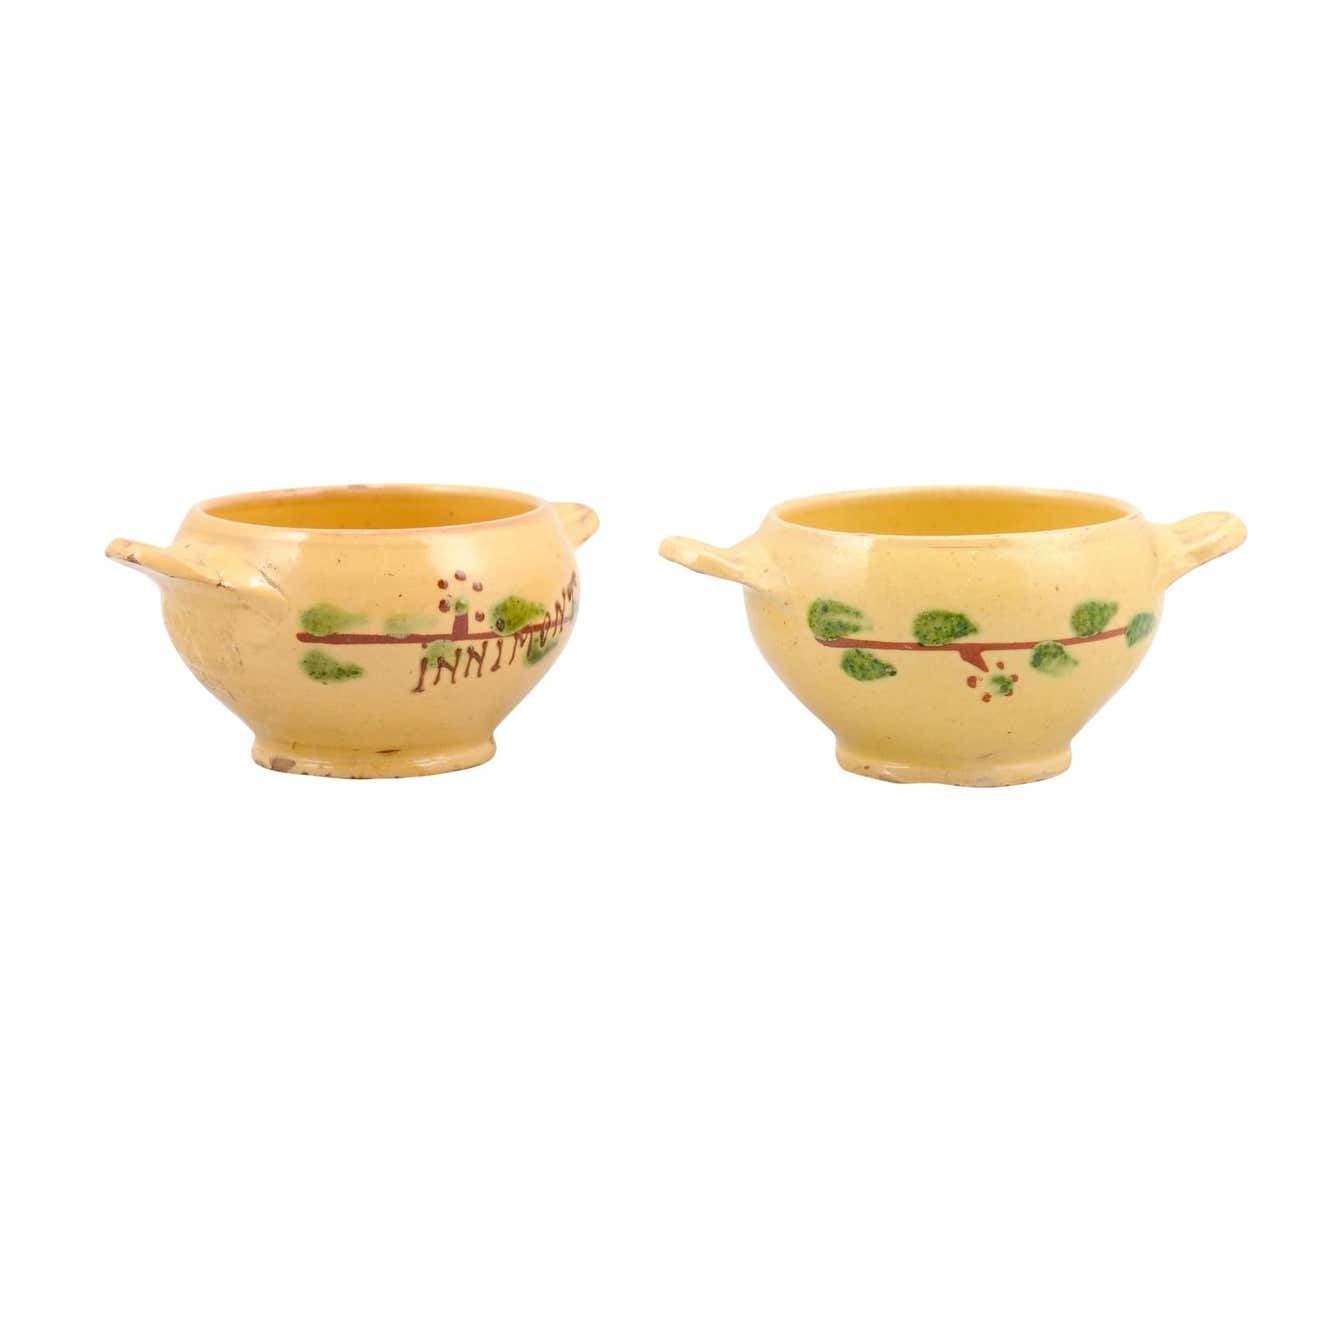 Petite 19th Century Eastern French Yellow Glazed Pottery Bowls from Innimont